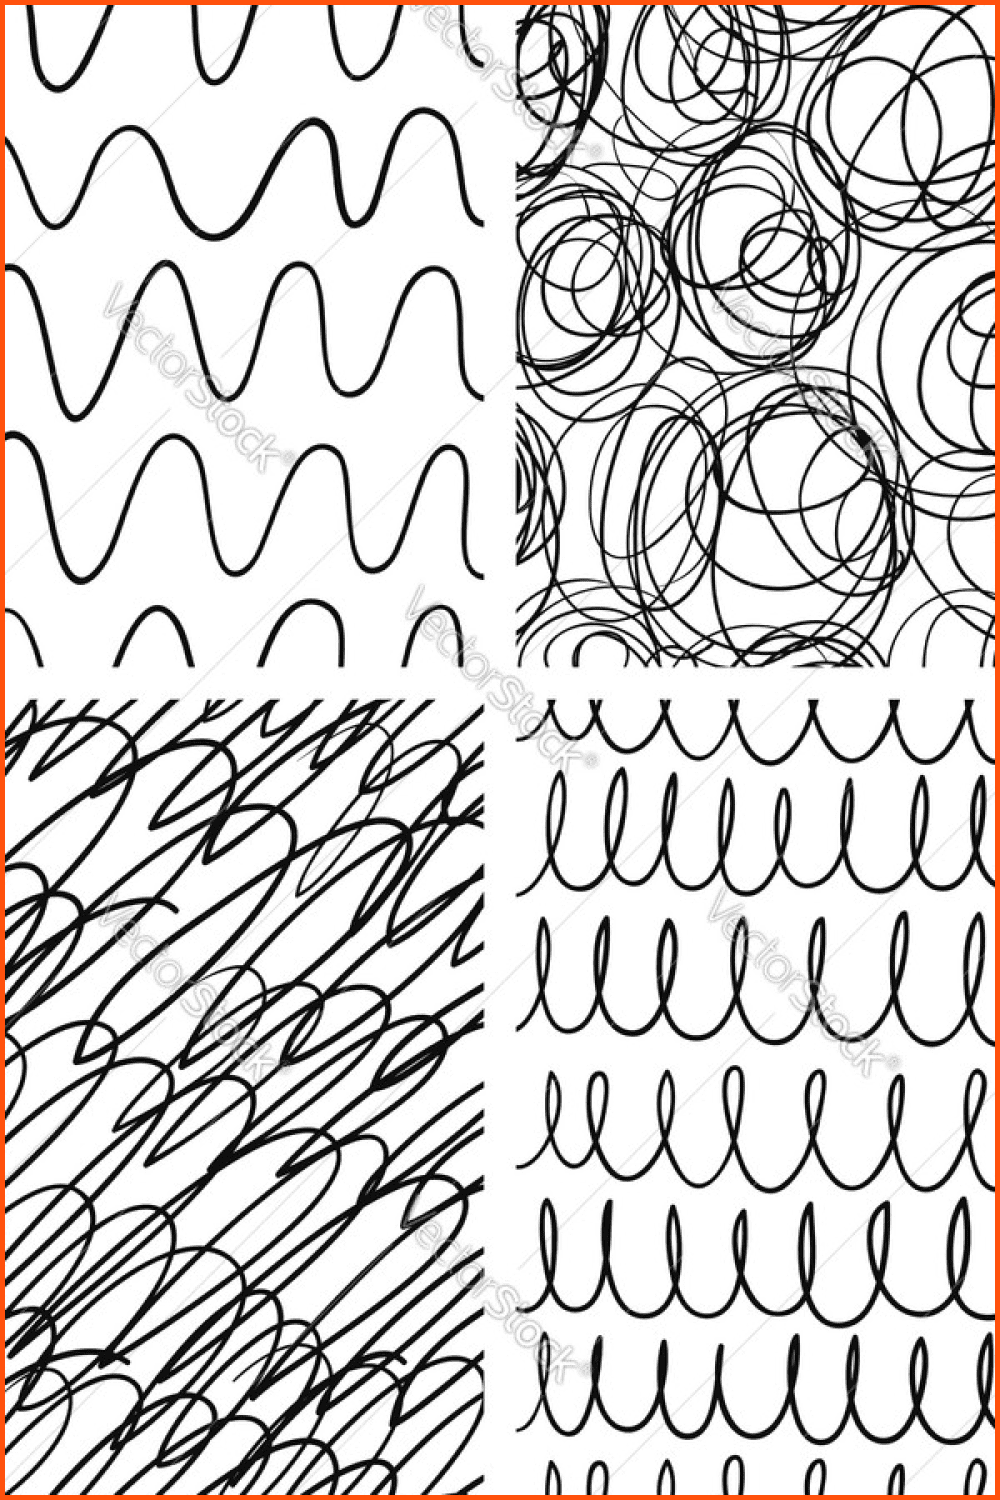 Chaotic Scribble Pattern.